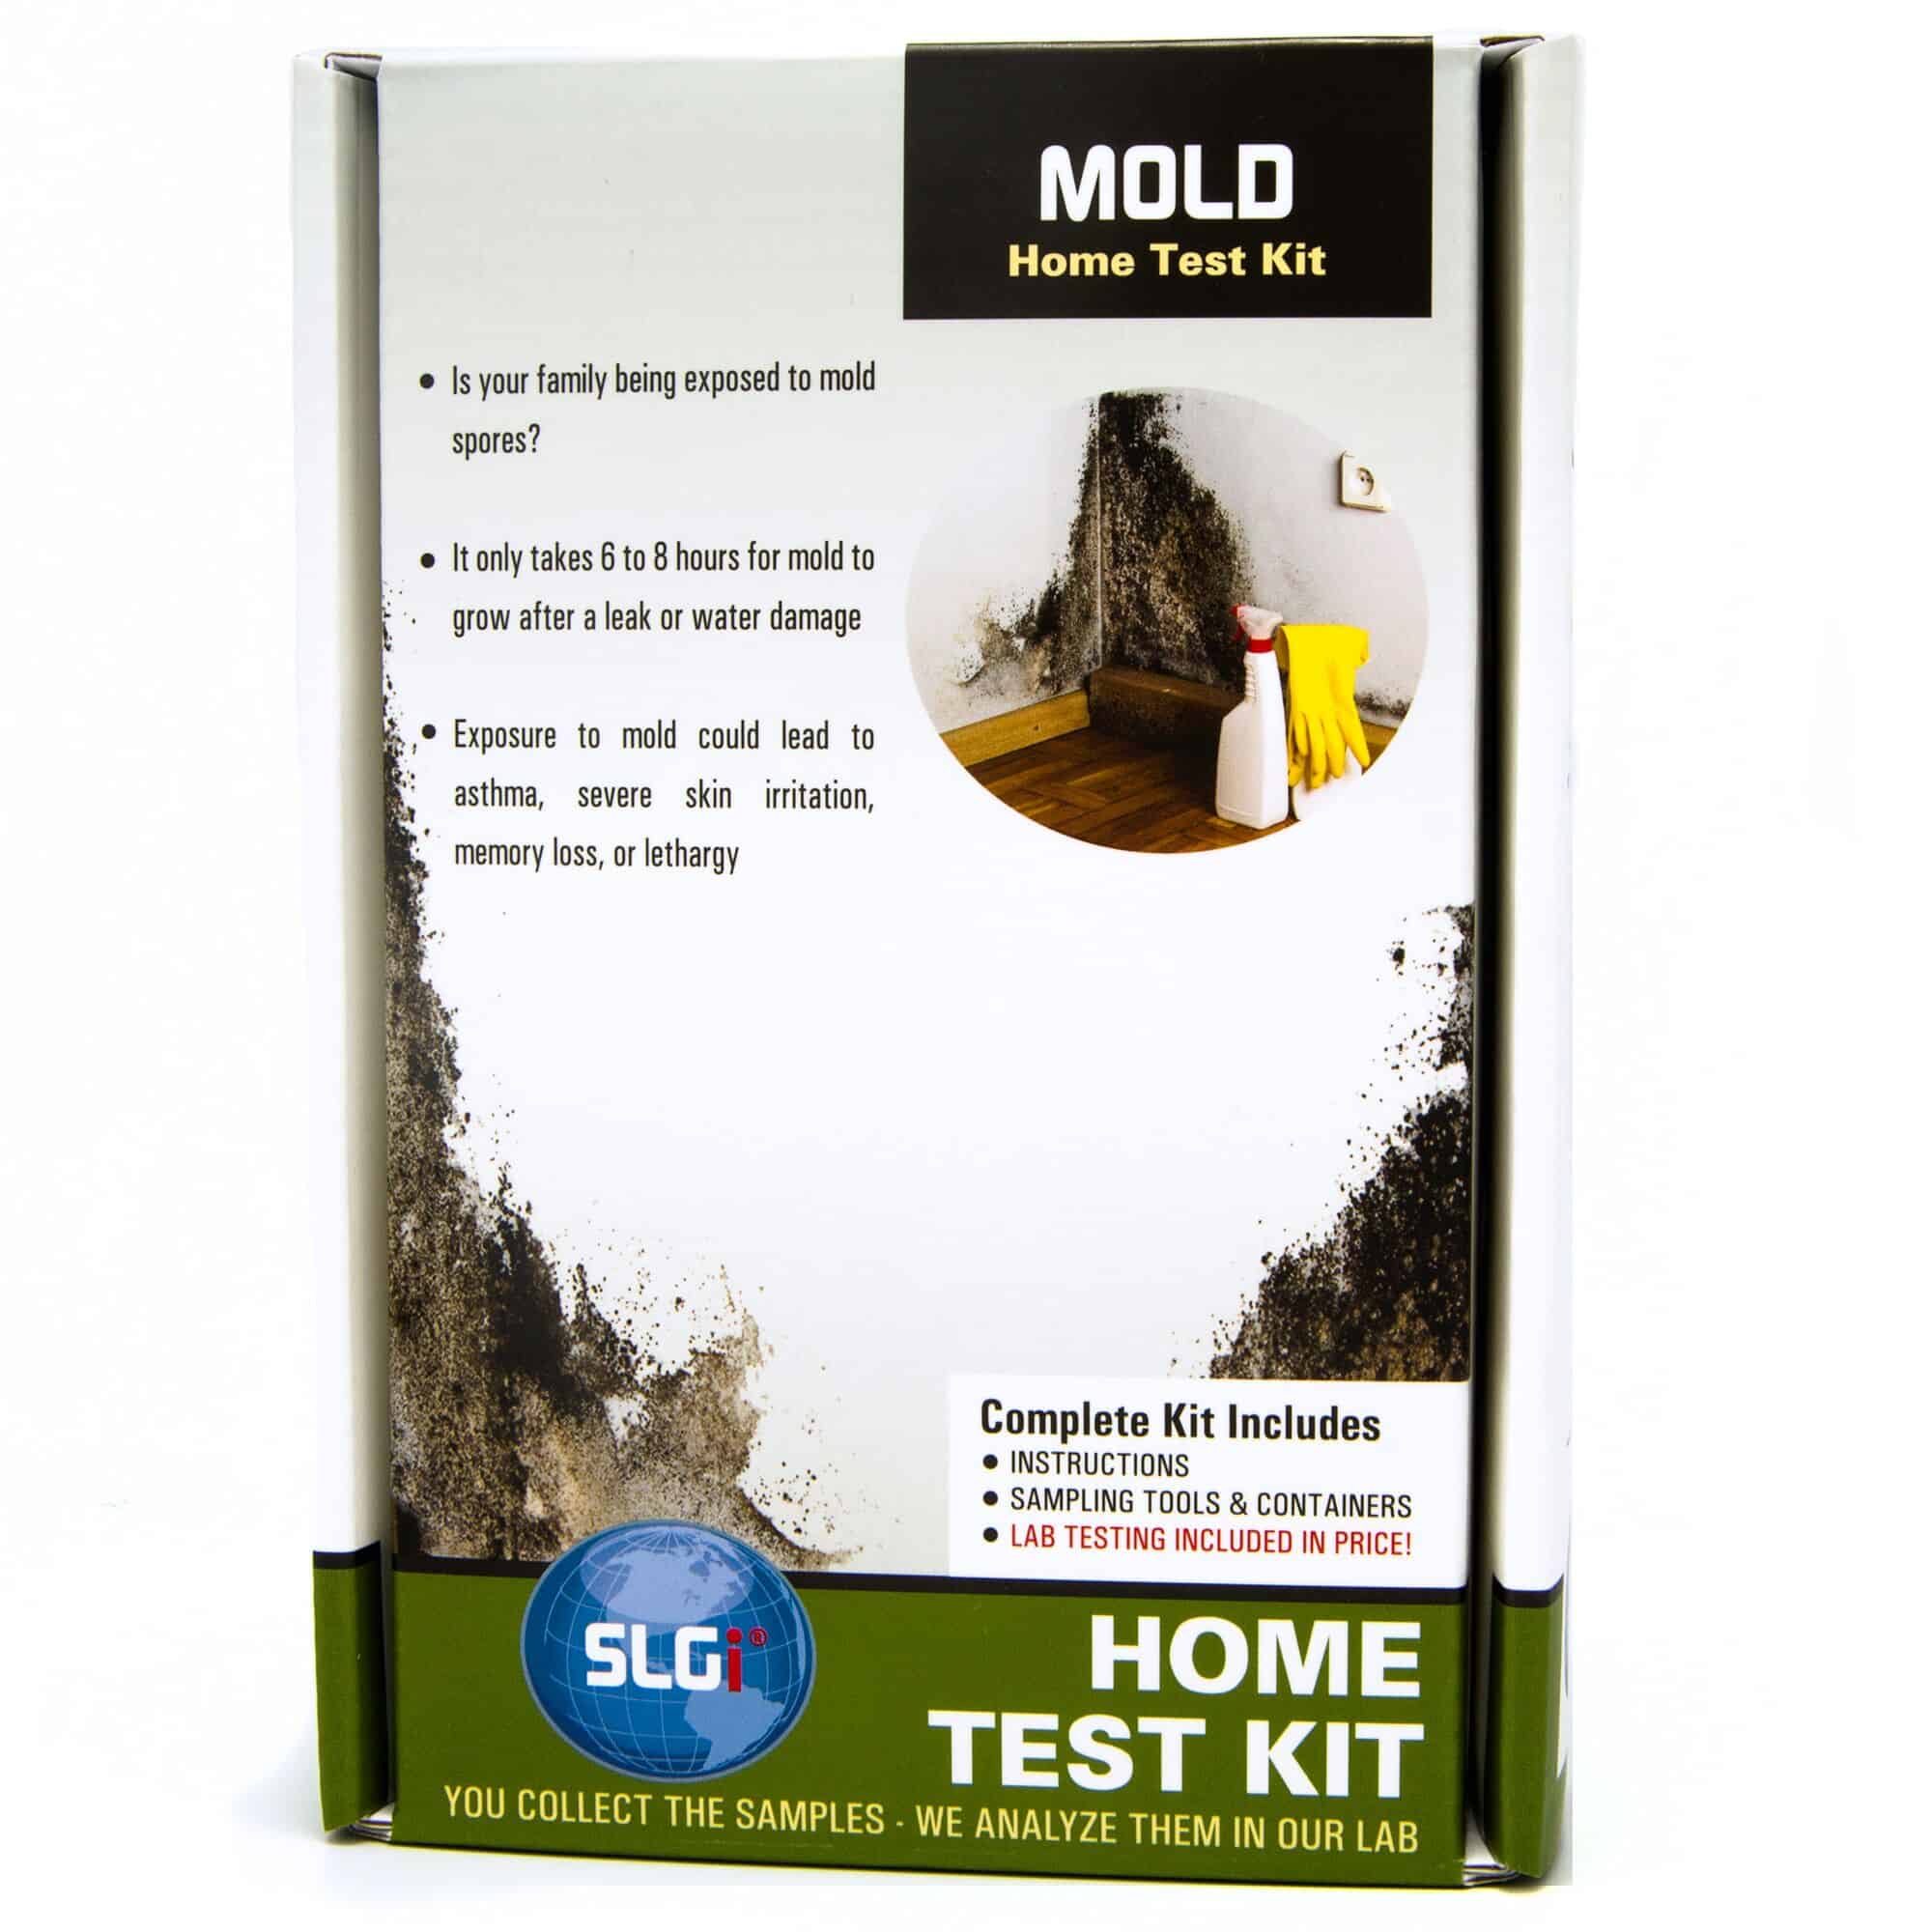 Mold Test Kits – Are these useful? by askno - Issuu